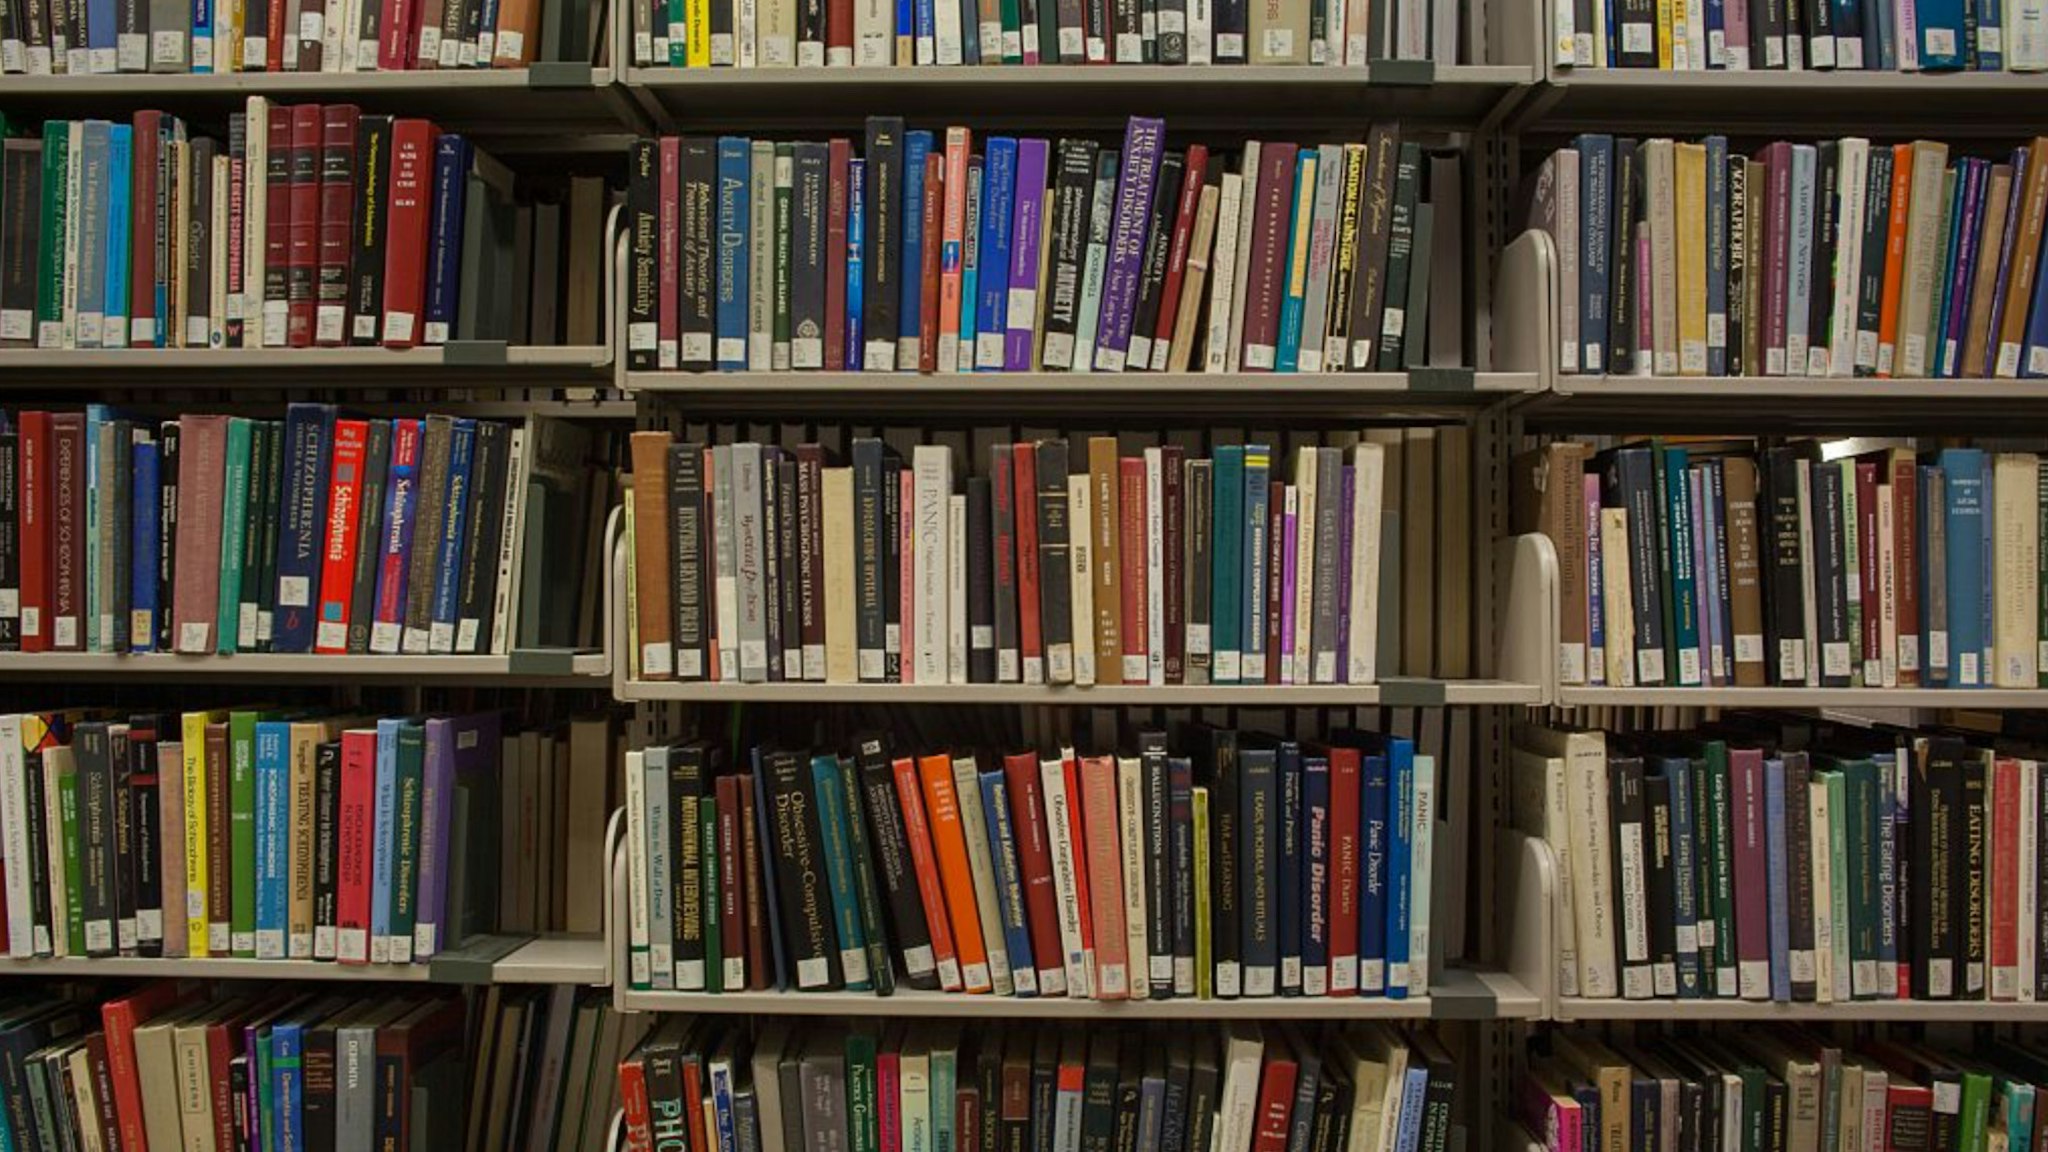 Shelves full of books on C-level, a quiet floor for studying, in the Milton S. Eisenhower Library on the Homewood campus of the Johns Hopkins University in Baltimore, Maryland, 2014.